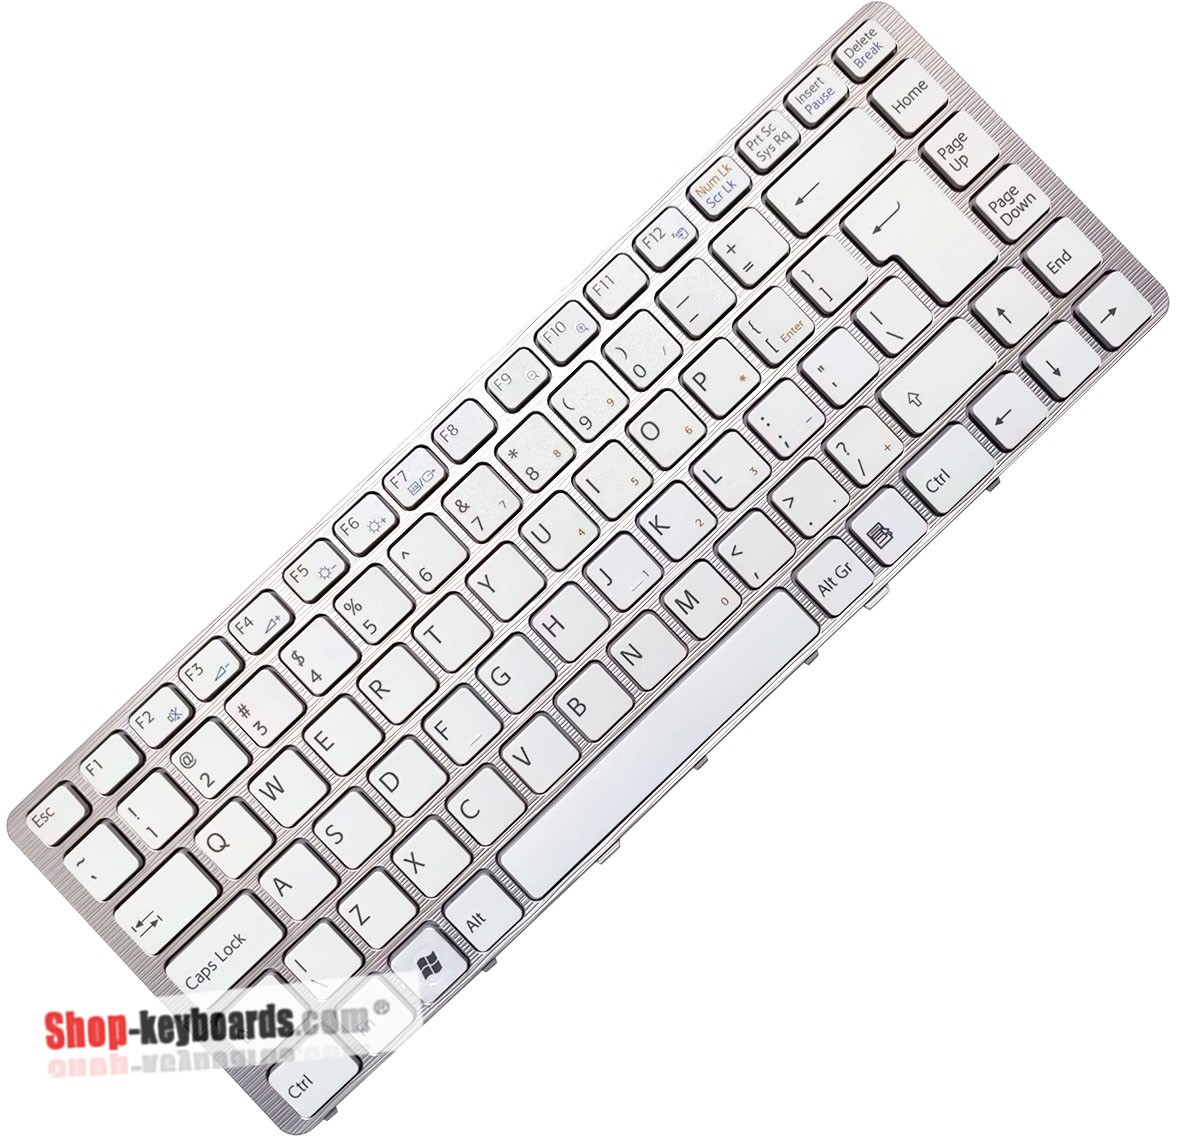 Sony 148738391 Keyboard replacement